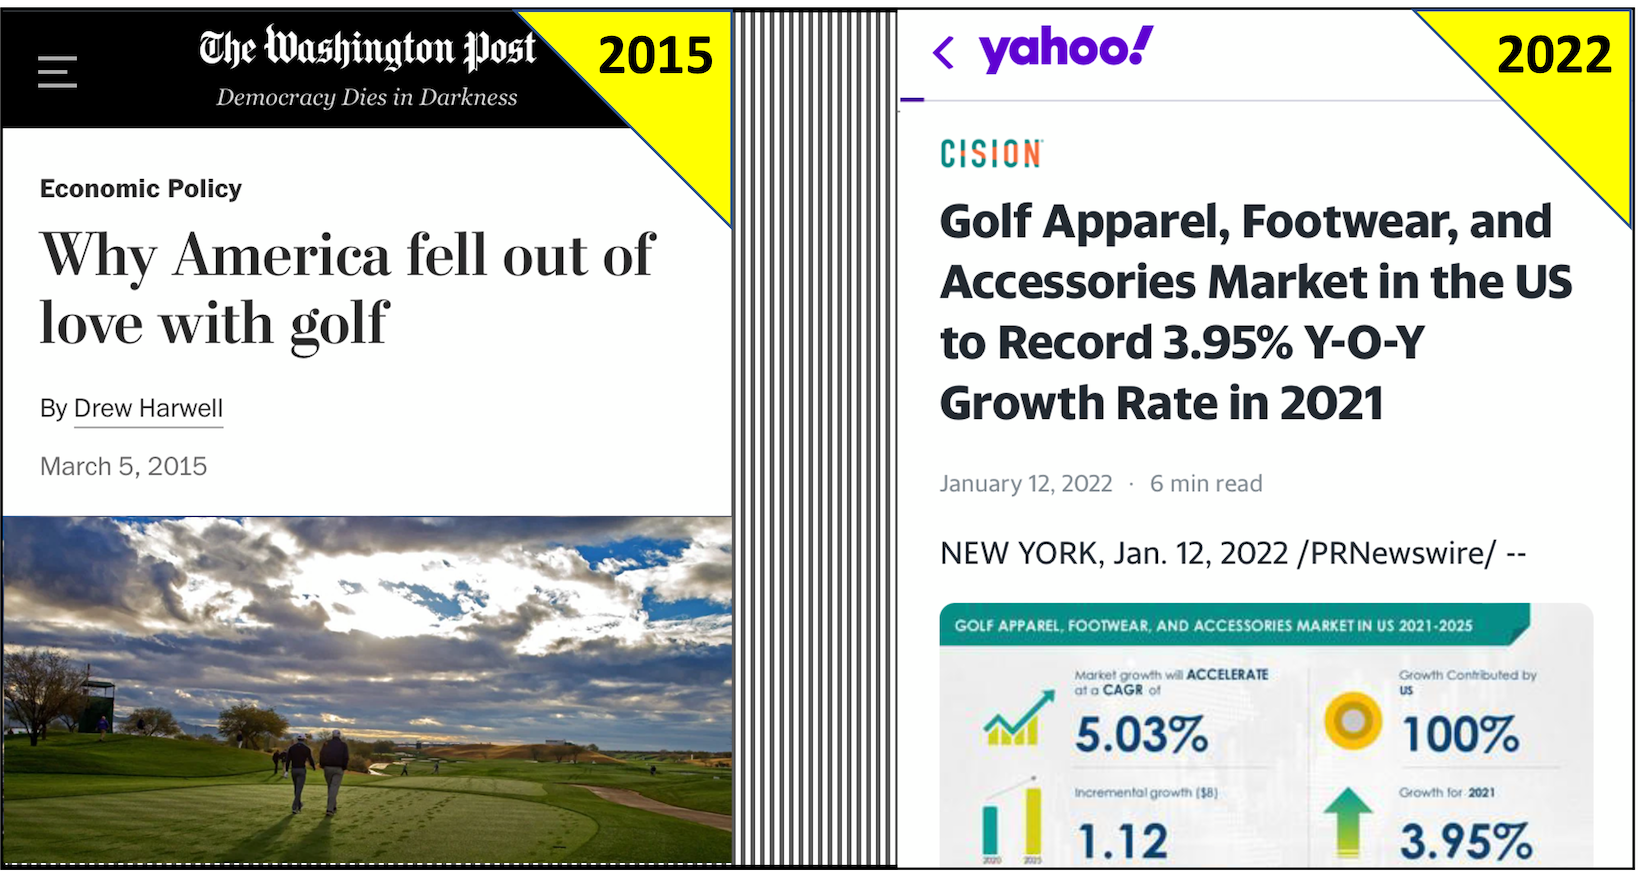 How Smart Marketing Rescued the Golf Industry